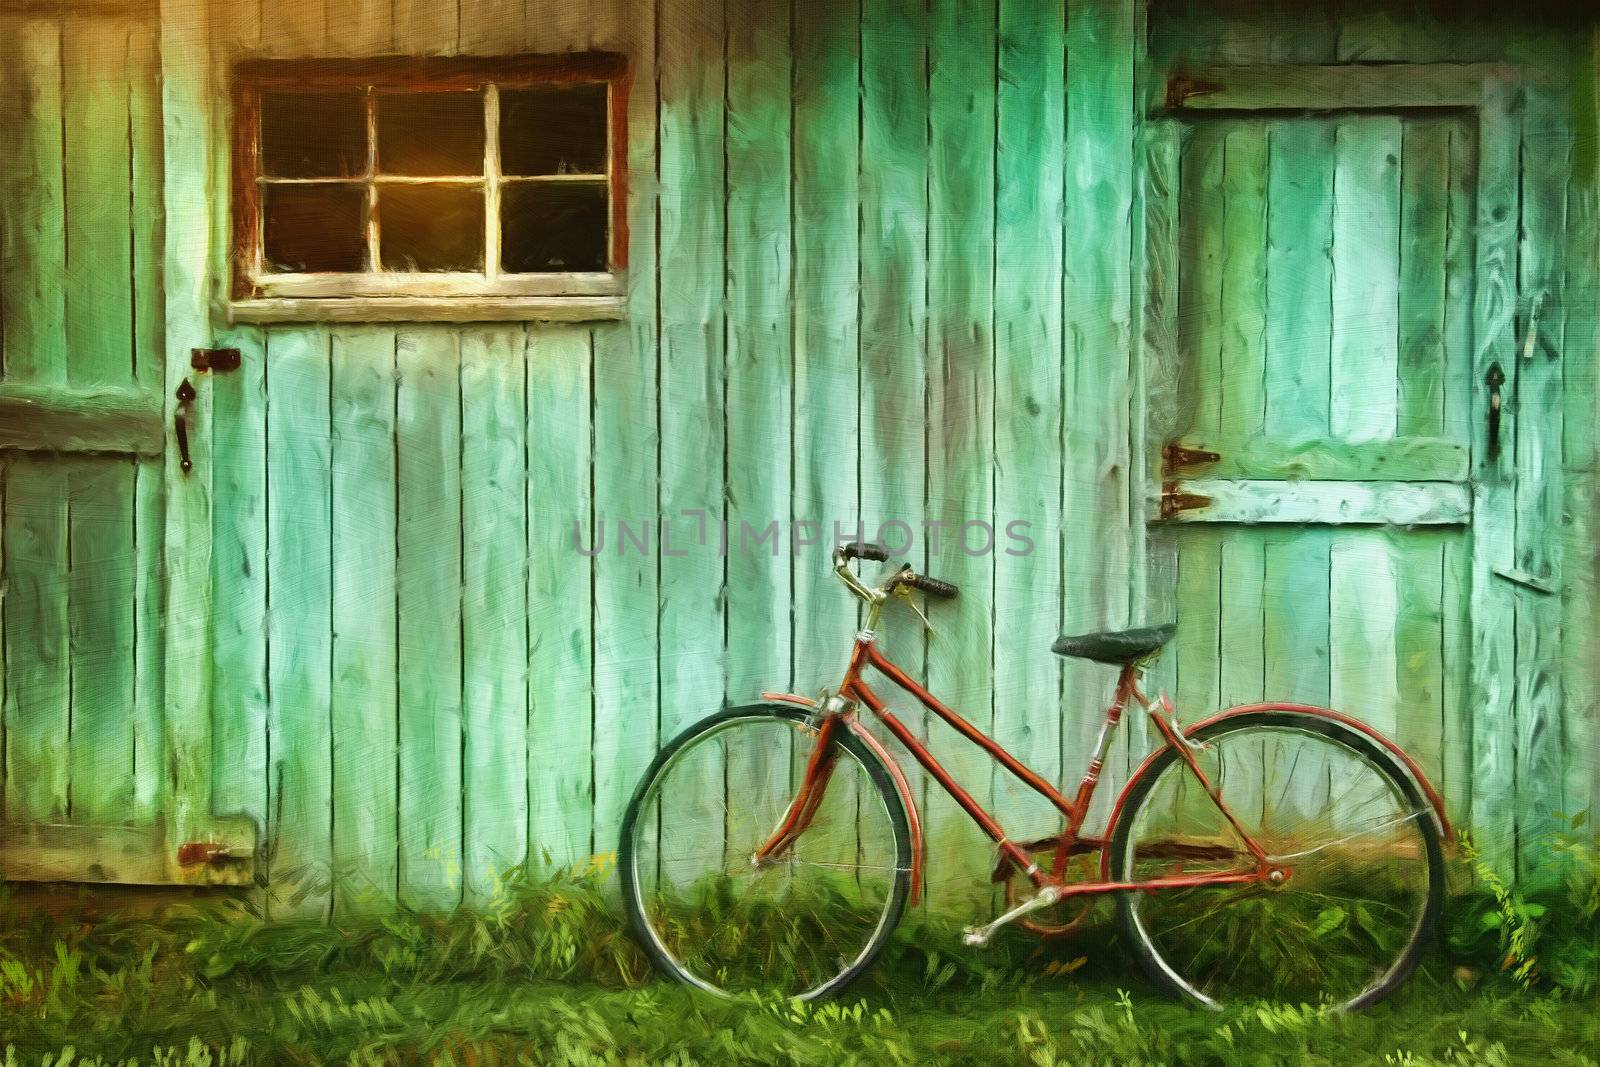 Digital Painting of old bicycle  against grungy barn